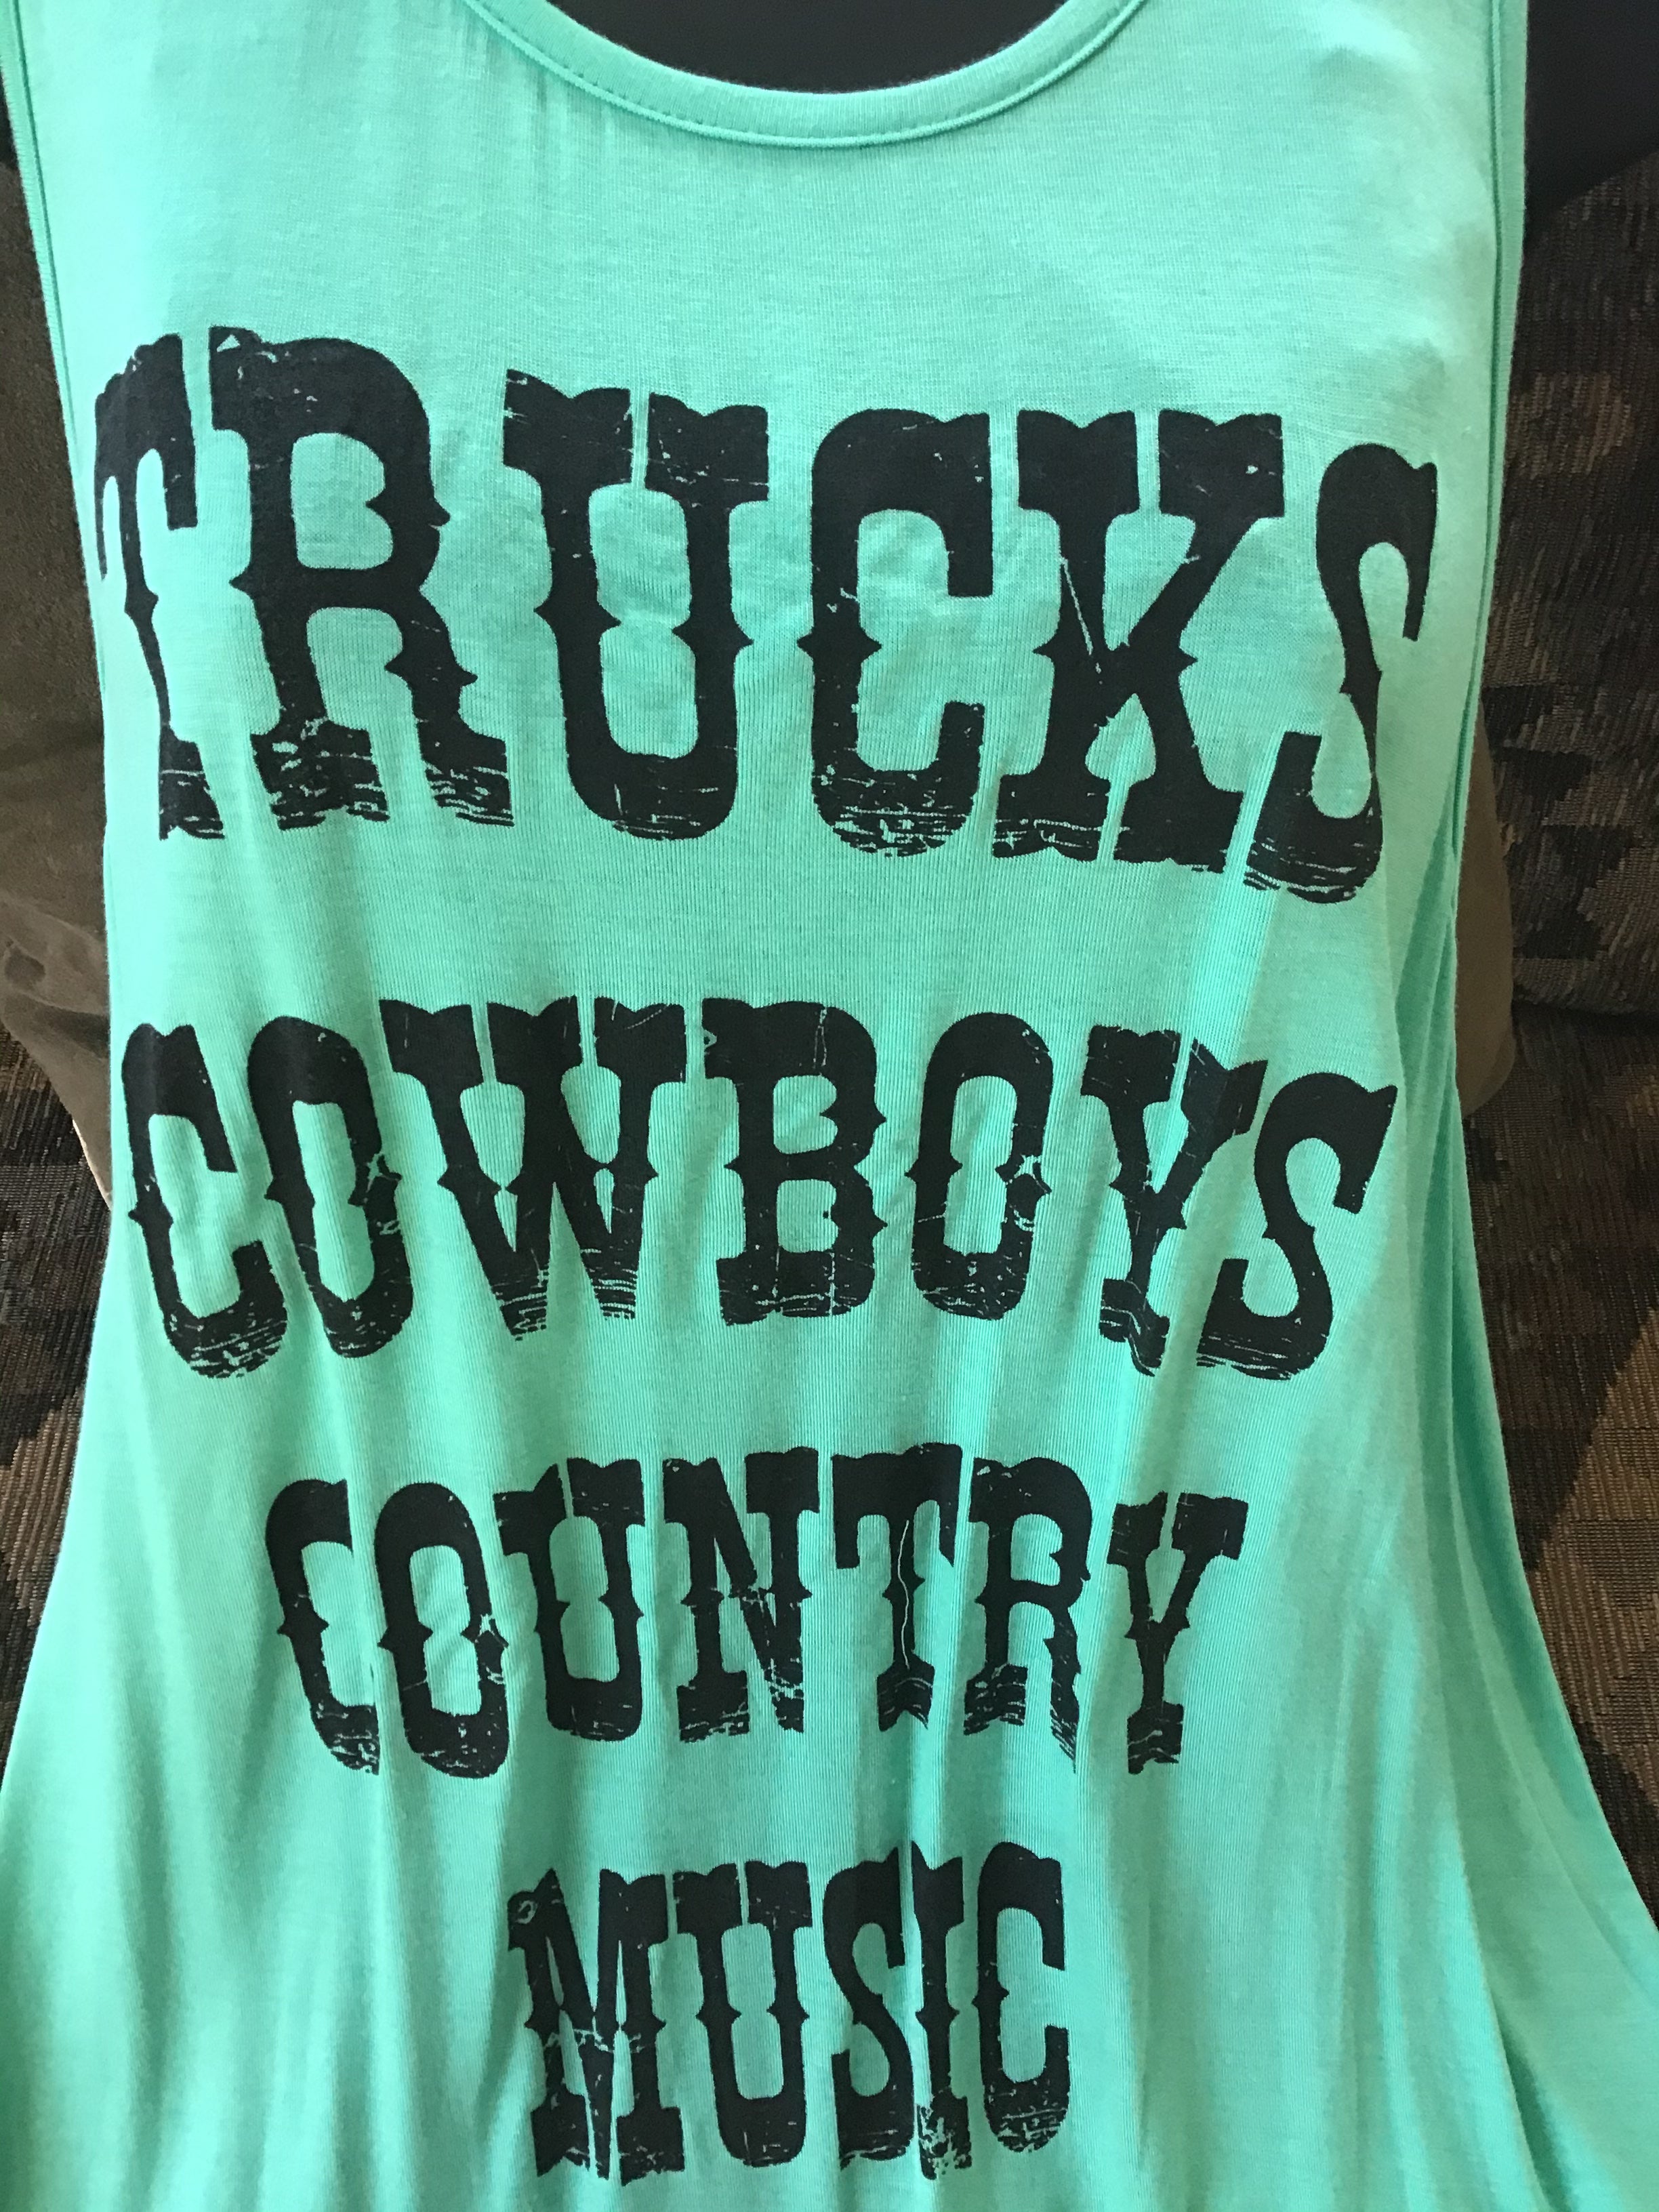 Grey or Teal Trucks Cowboys Country Music graphic plus size racer back tank top with trucks cowboys Fabric 95% Rayon, 5% Spandex